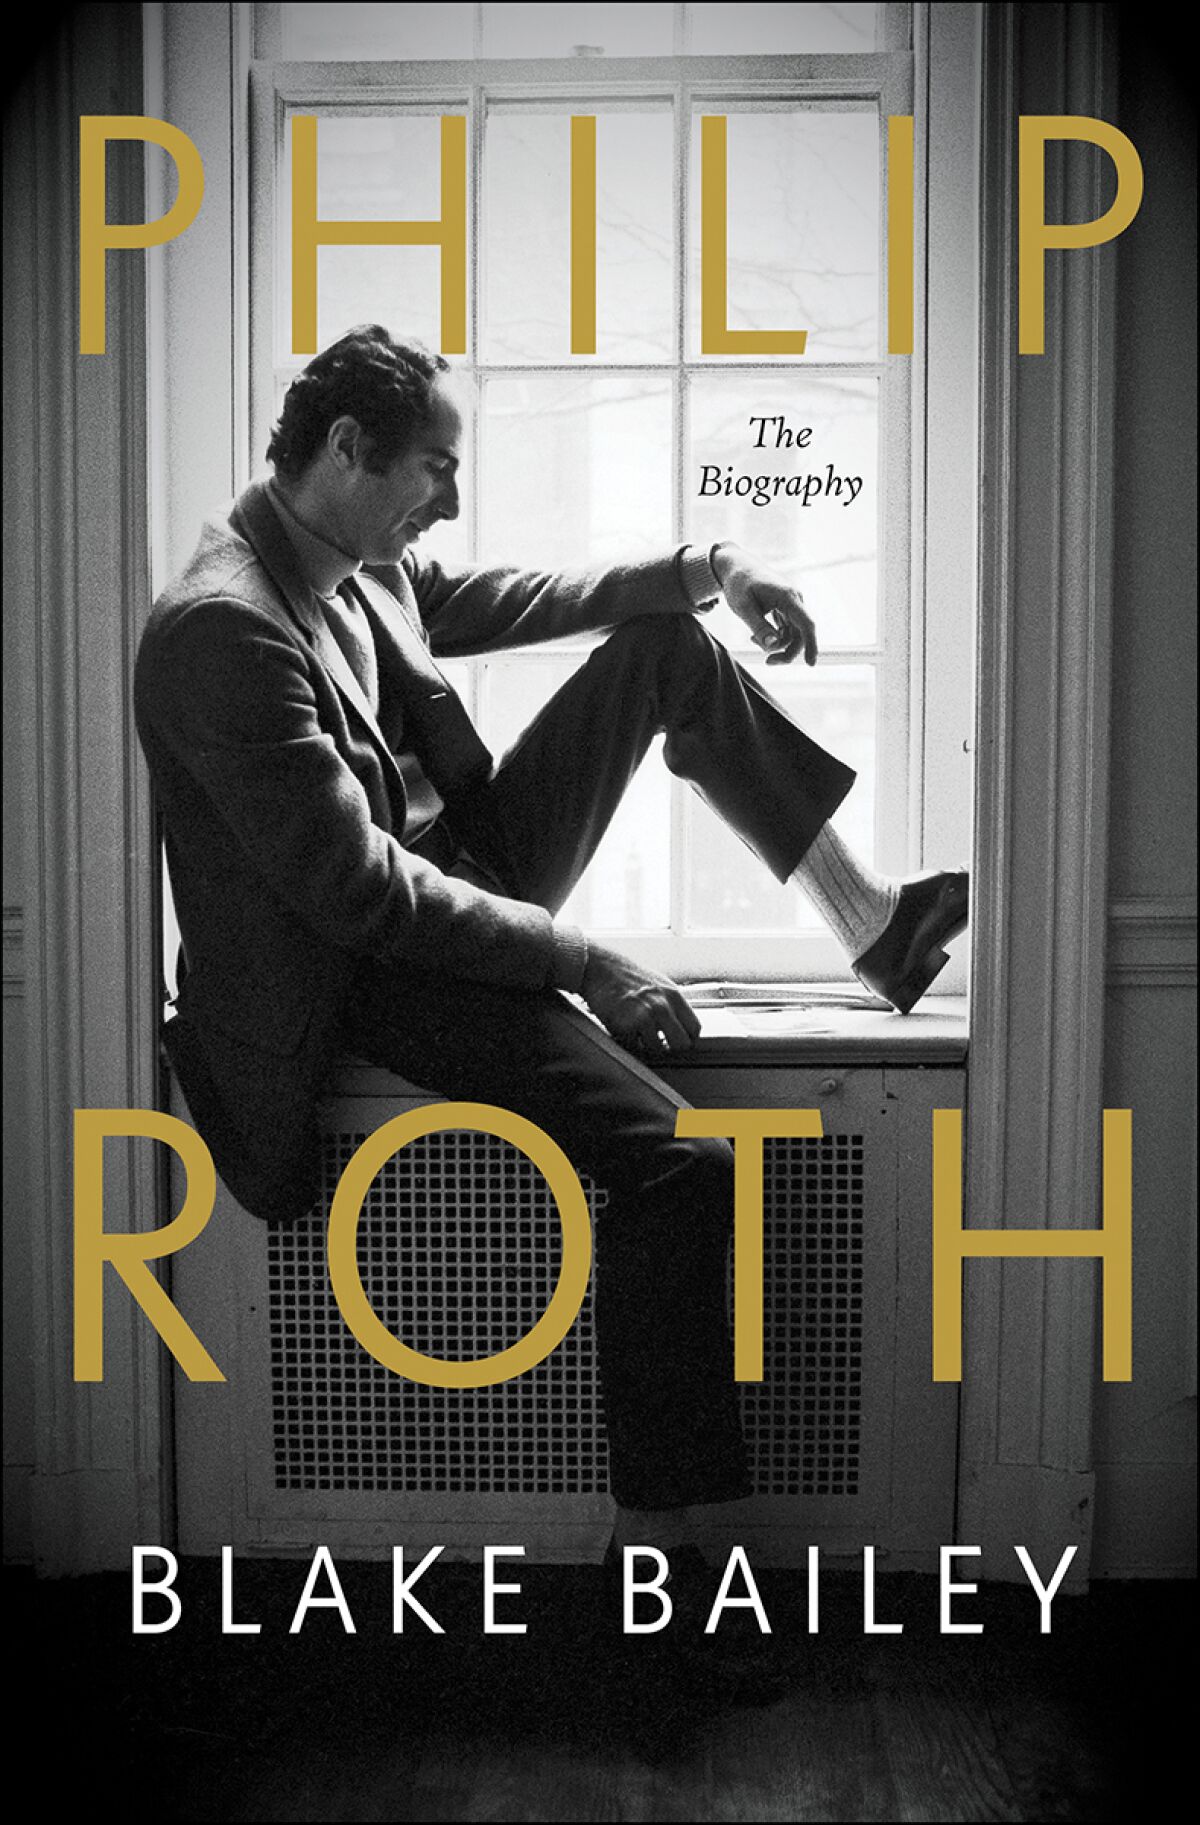 Cover of the book "Philip Roth: The Biography," by Blake Bailey